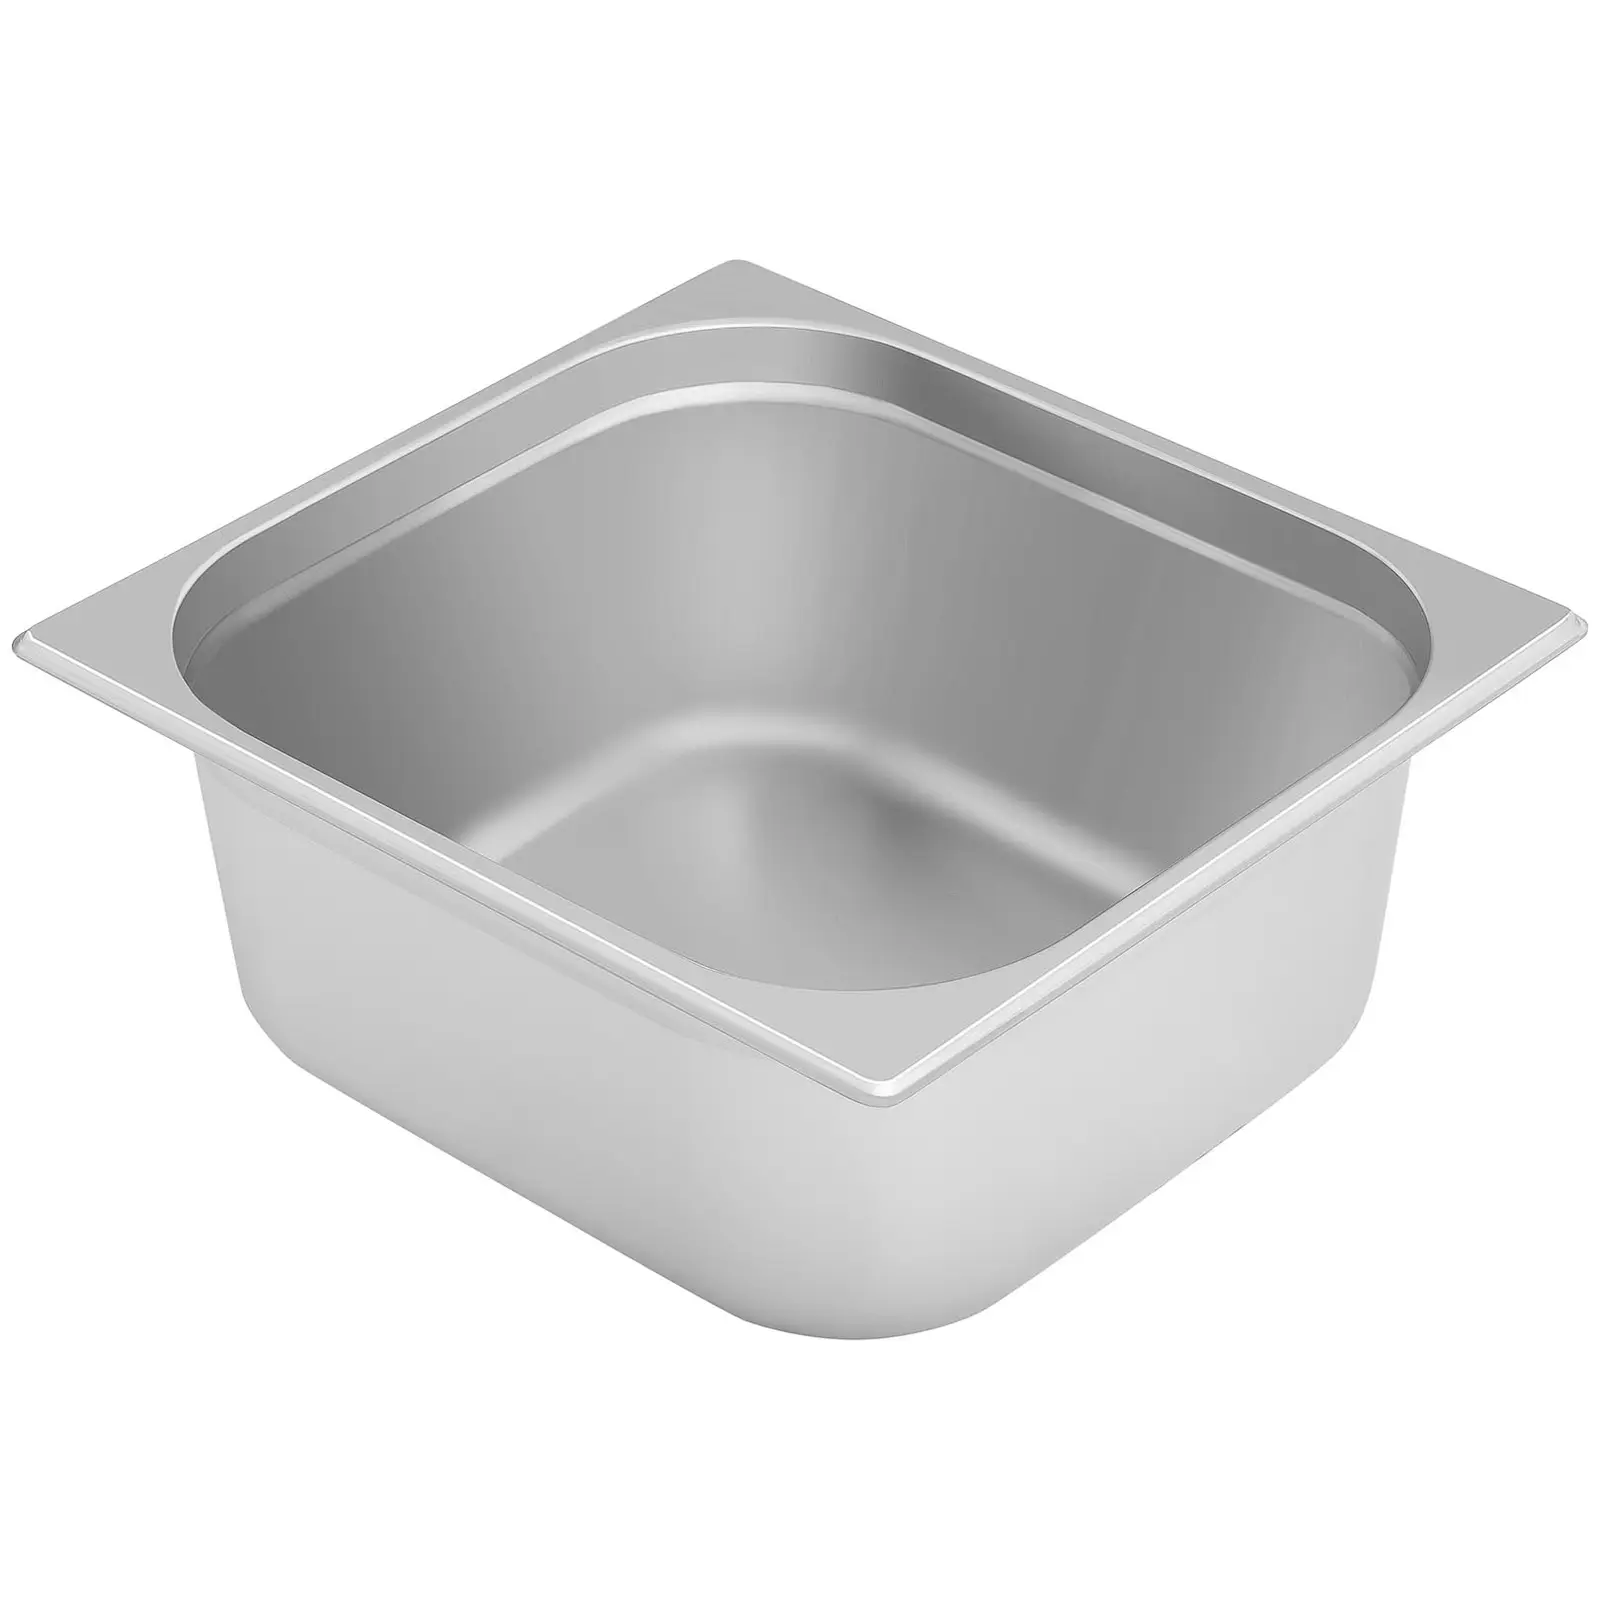 Gastronorm Tray - 2/3 - 150 mm